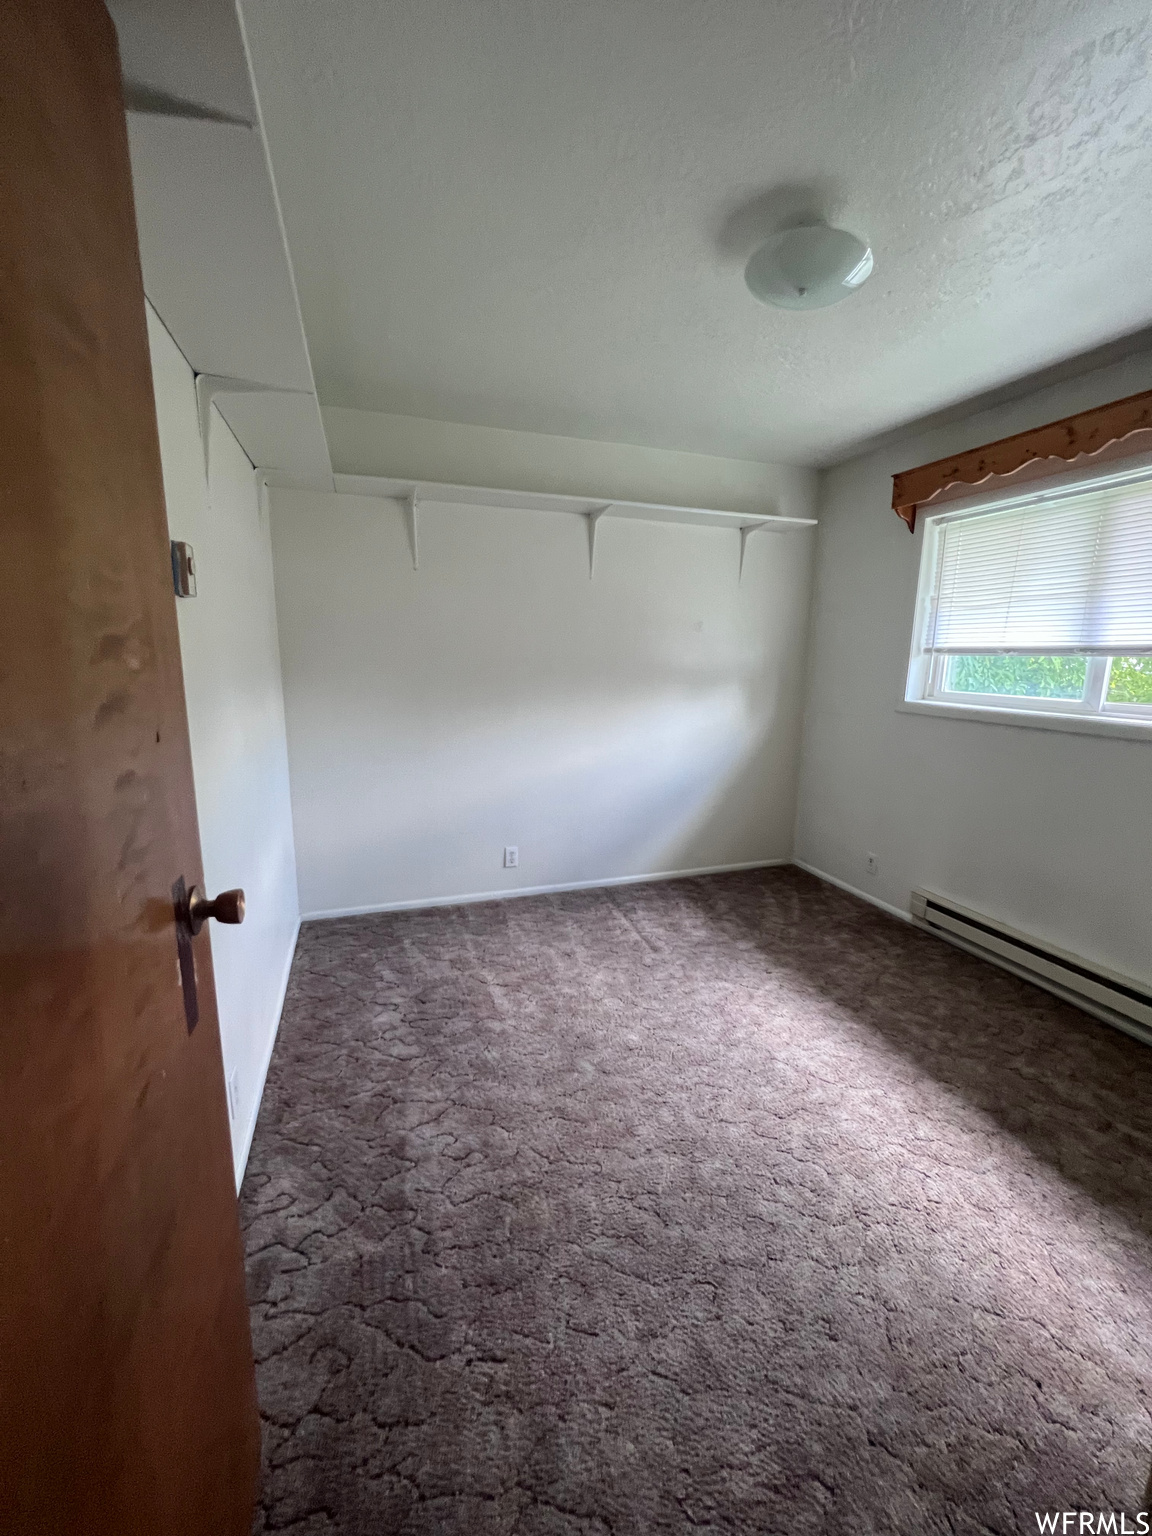 Spare room with a baseboard radiator, a textured ceiling, and carpet flooring